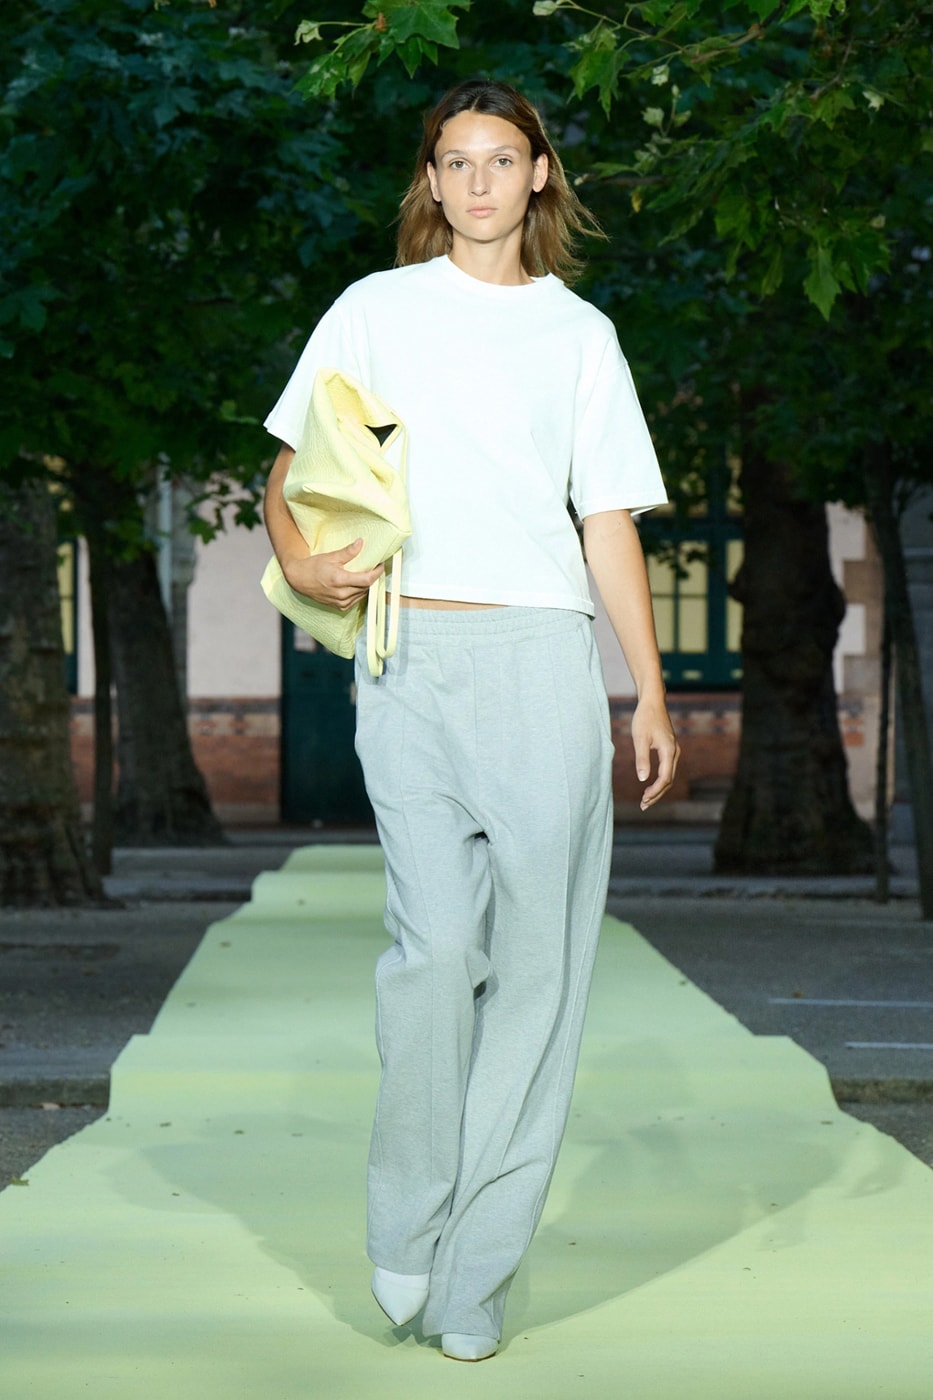 Chaz A. Jordan's 1989 Studio SS24 Collection Appeals to the Everyday Cool Kid Paris Fashion Week PFW ss24